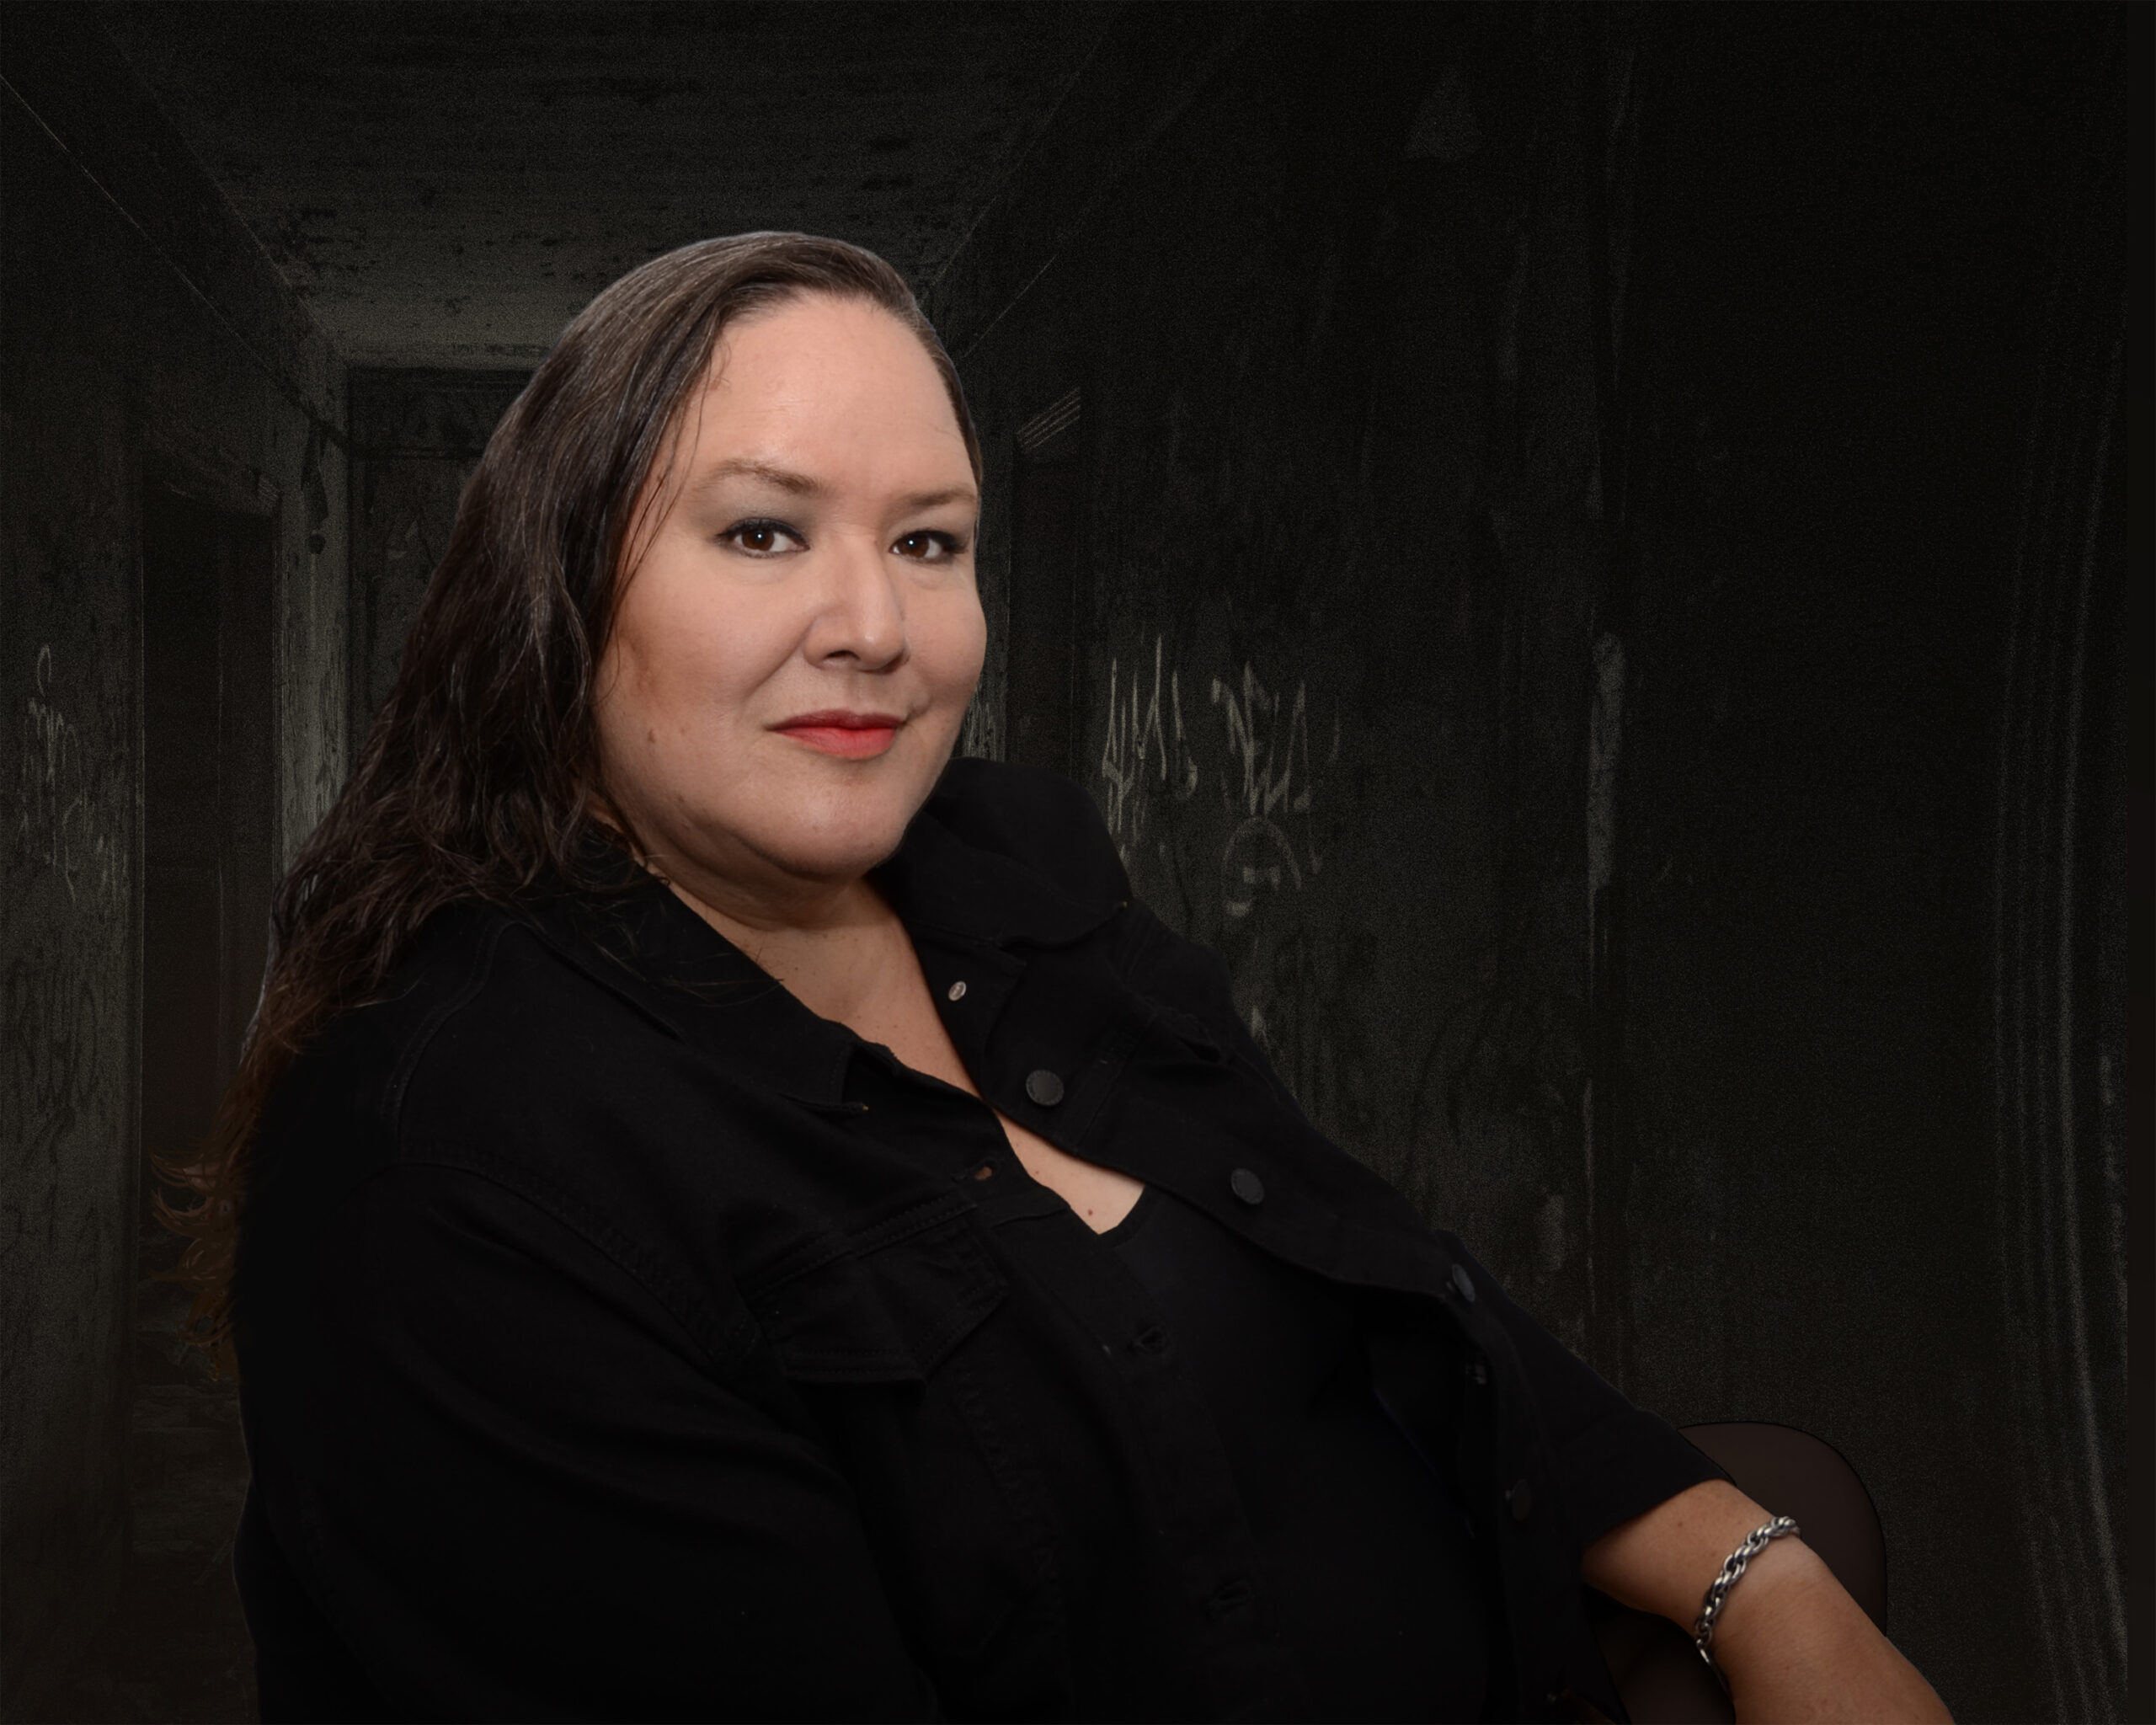 Anishinaabe poet from Rainy River First Nations longlisted for CBC Poetry Prize